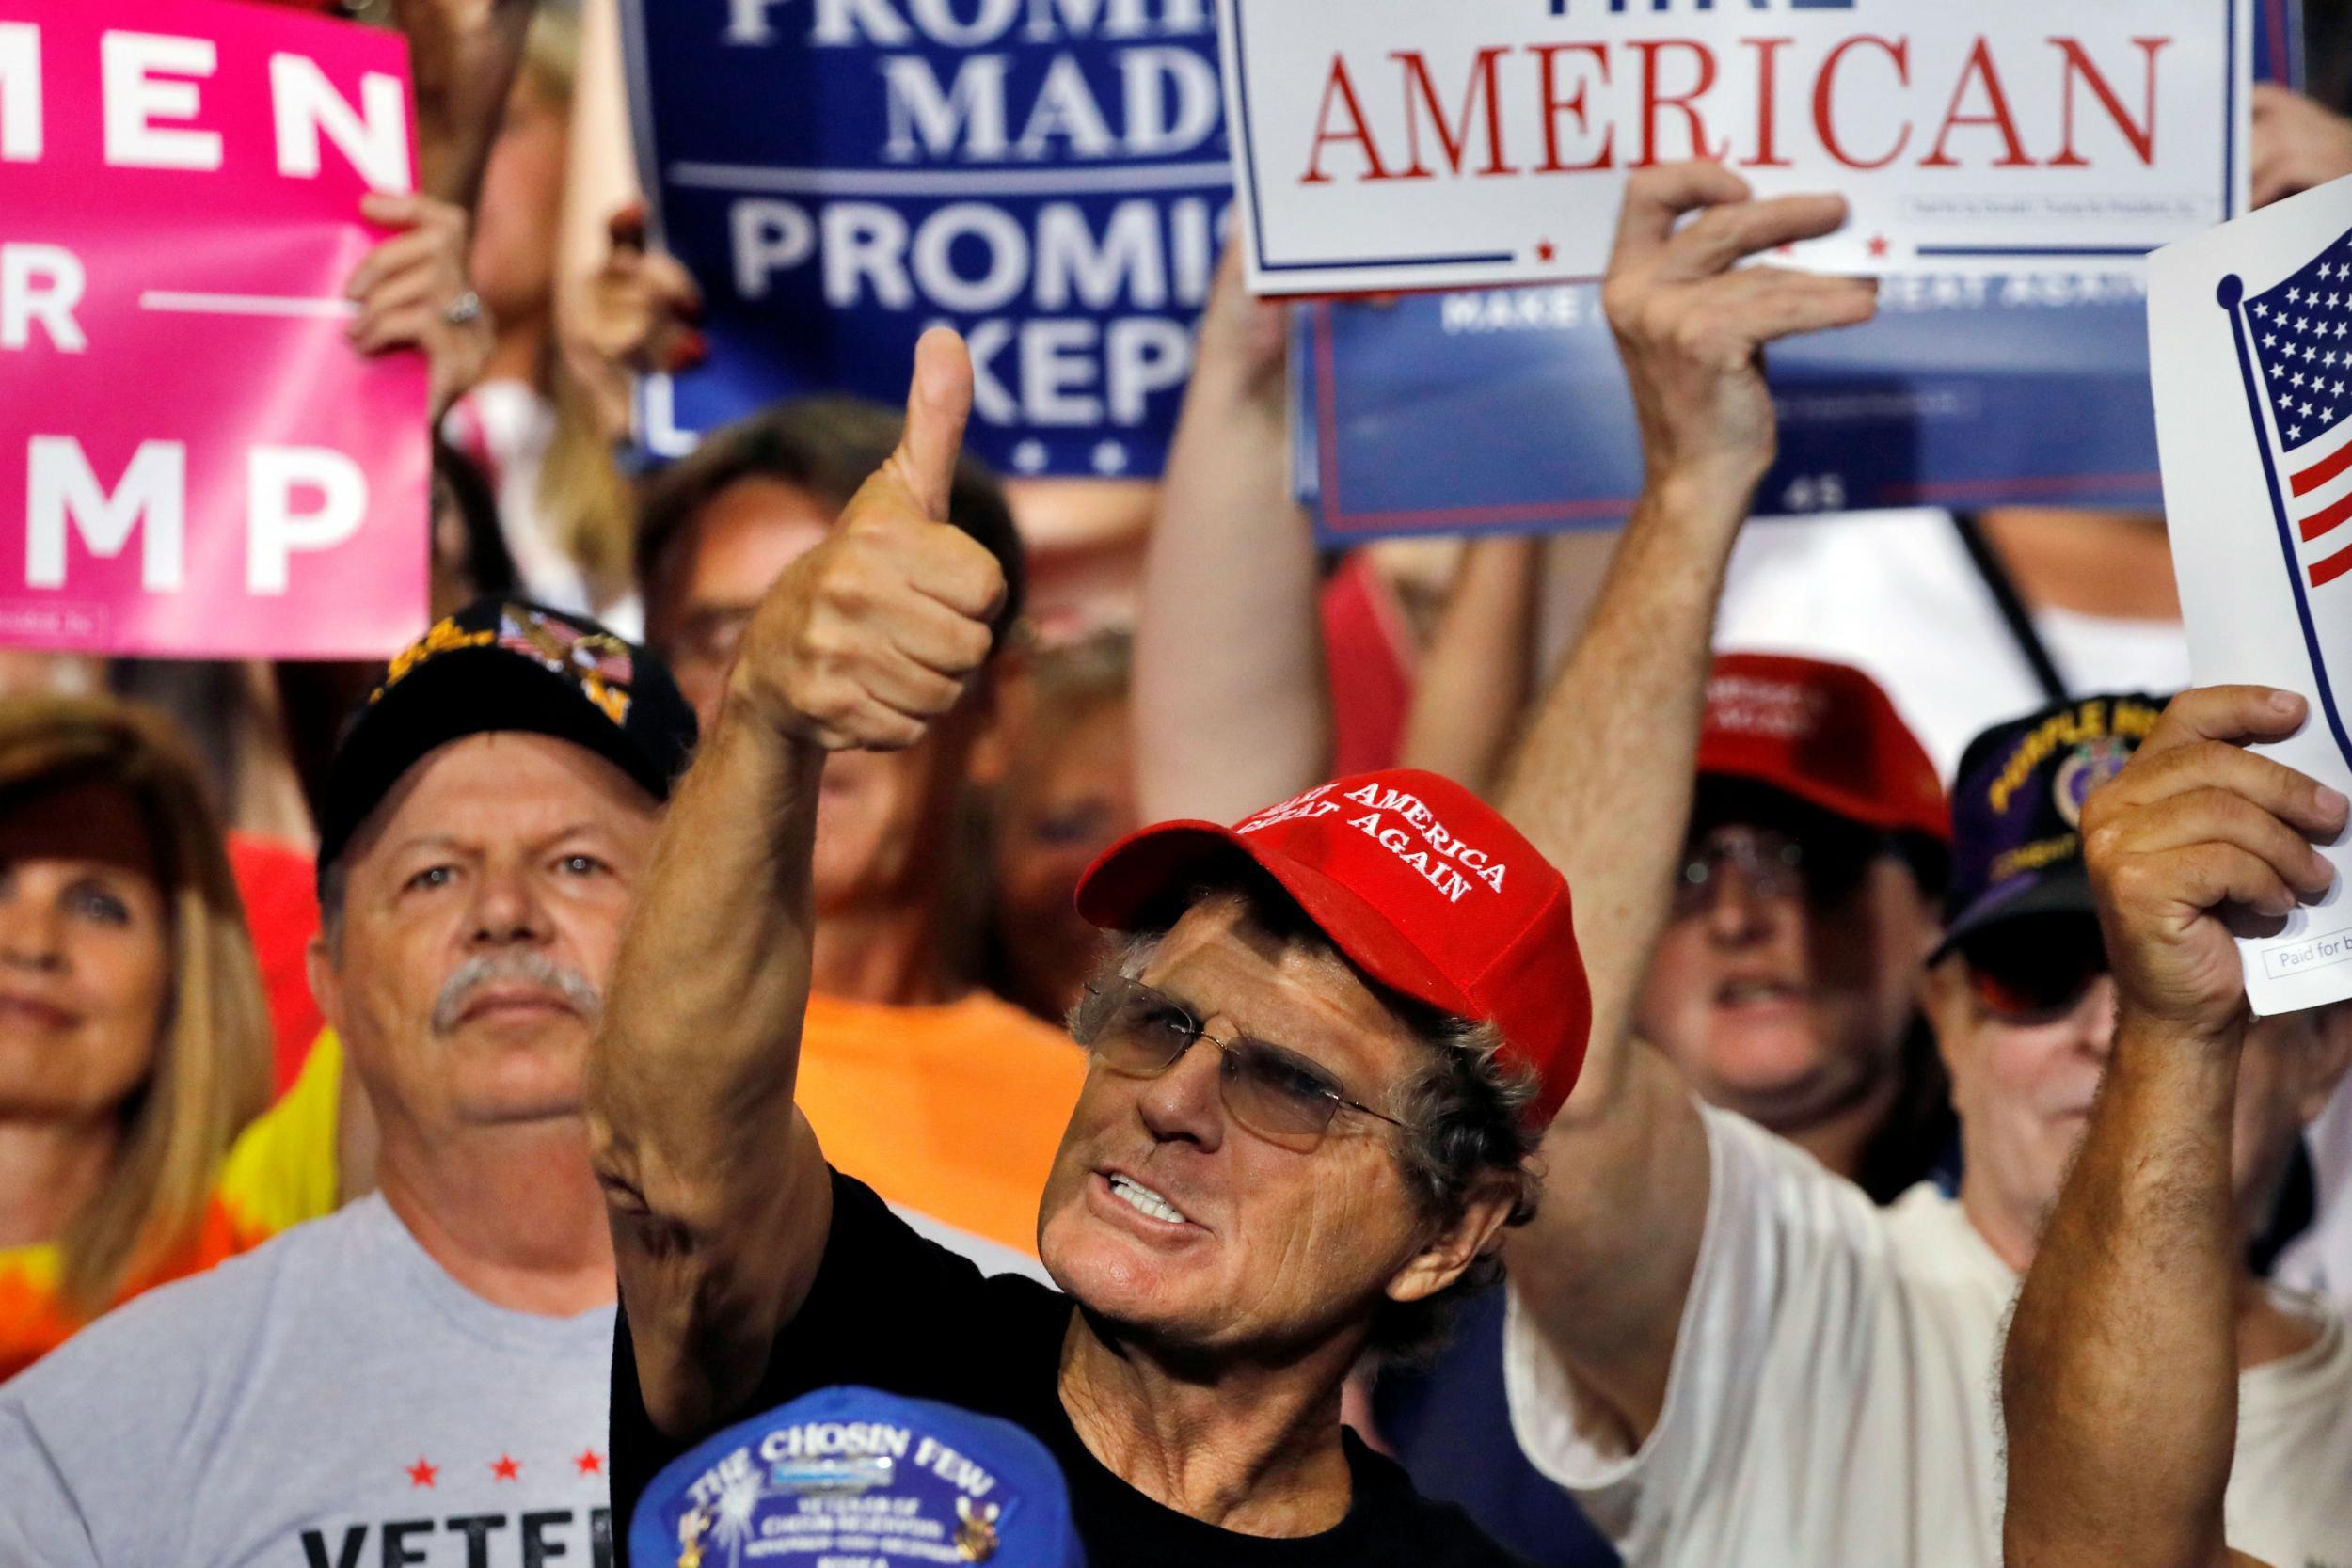 Trump supporters react at a rally after he accuses people of 'fabricating' information about him